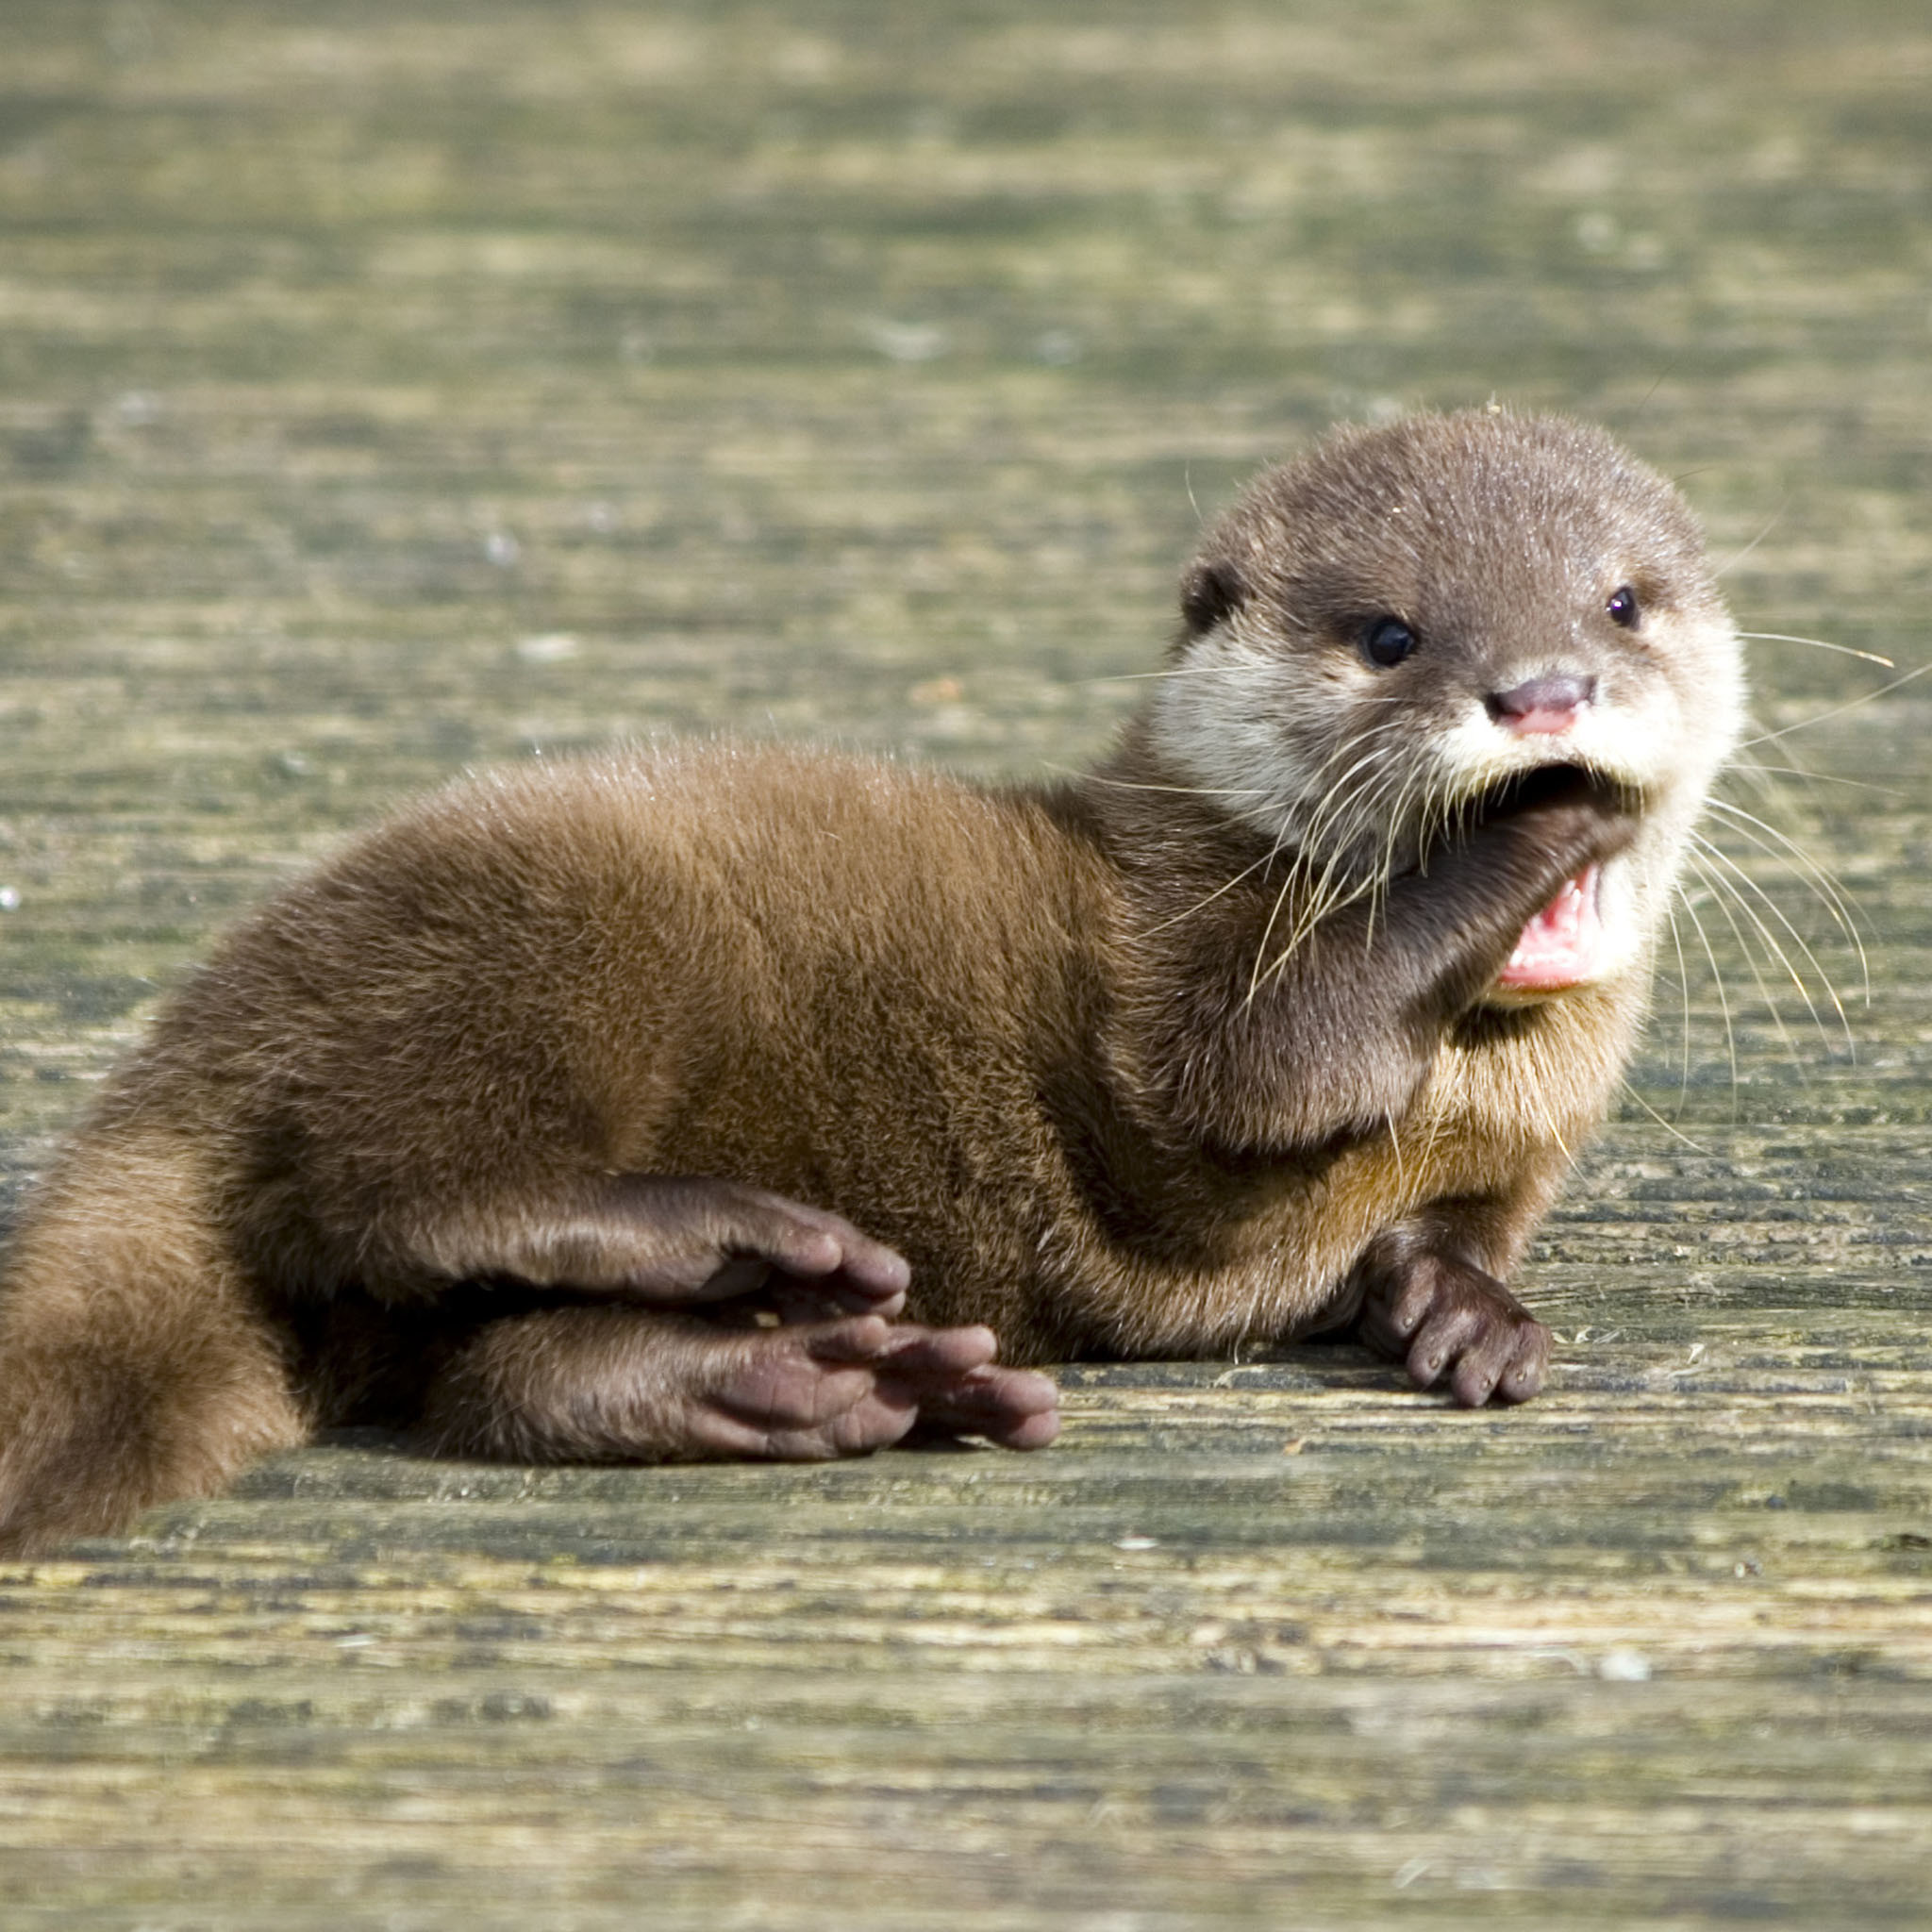 2048x2048 2048 x 2048 iPod 3 wallpapers, backgrounds - Cute Baby Otter